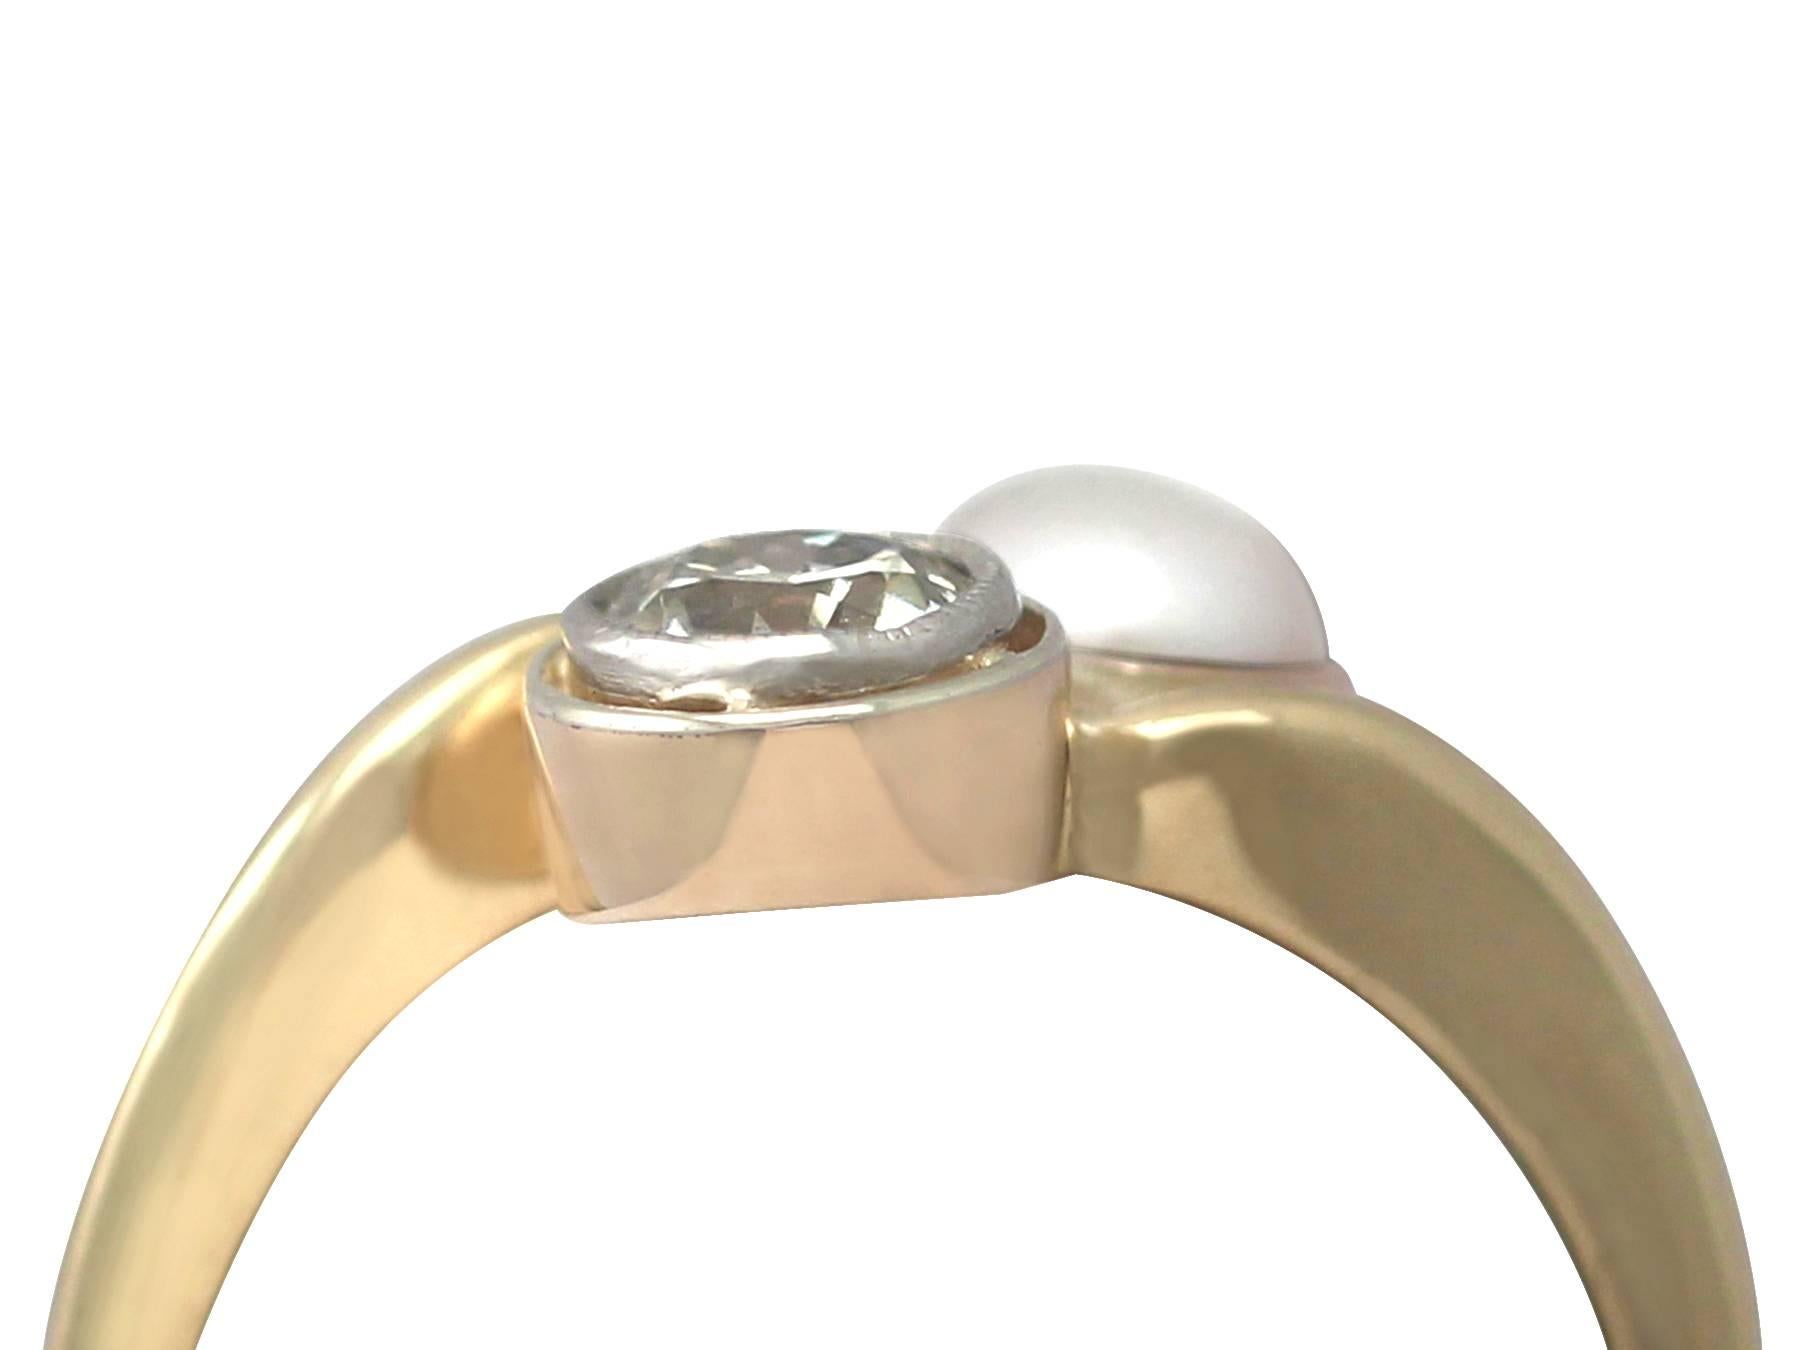 A fine and impressive pearl and 0.48 carat diamond, 18 karat yellow gold twist ring; part of our diverse antique jewelry and estate jewelry collections

This fine and impressive antique  pearl and diamond ring has been crafted in 18k yellow gold